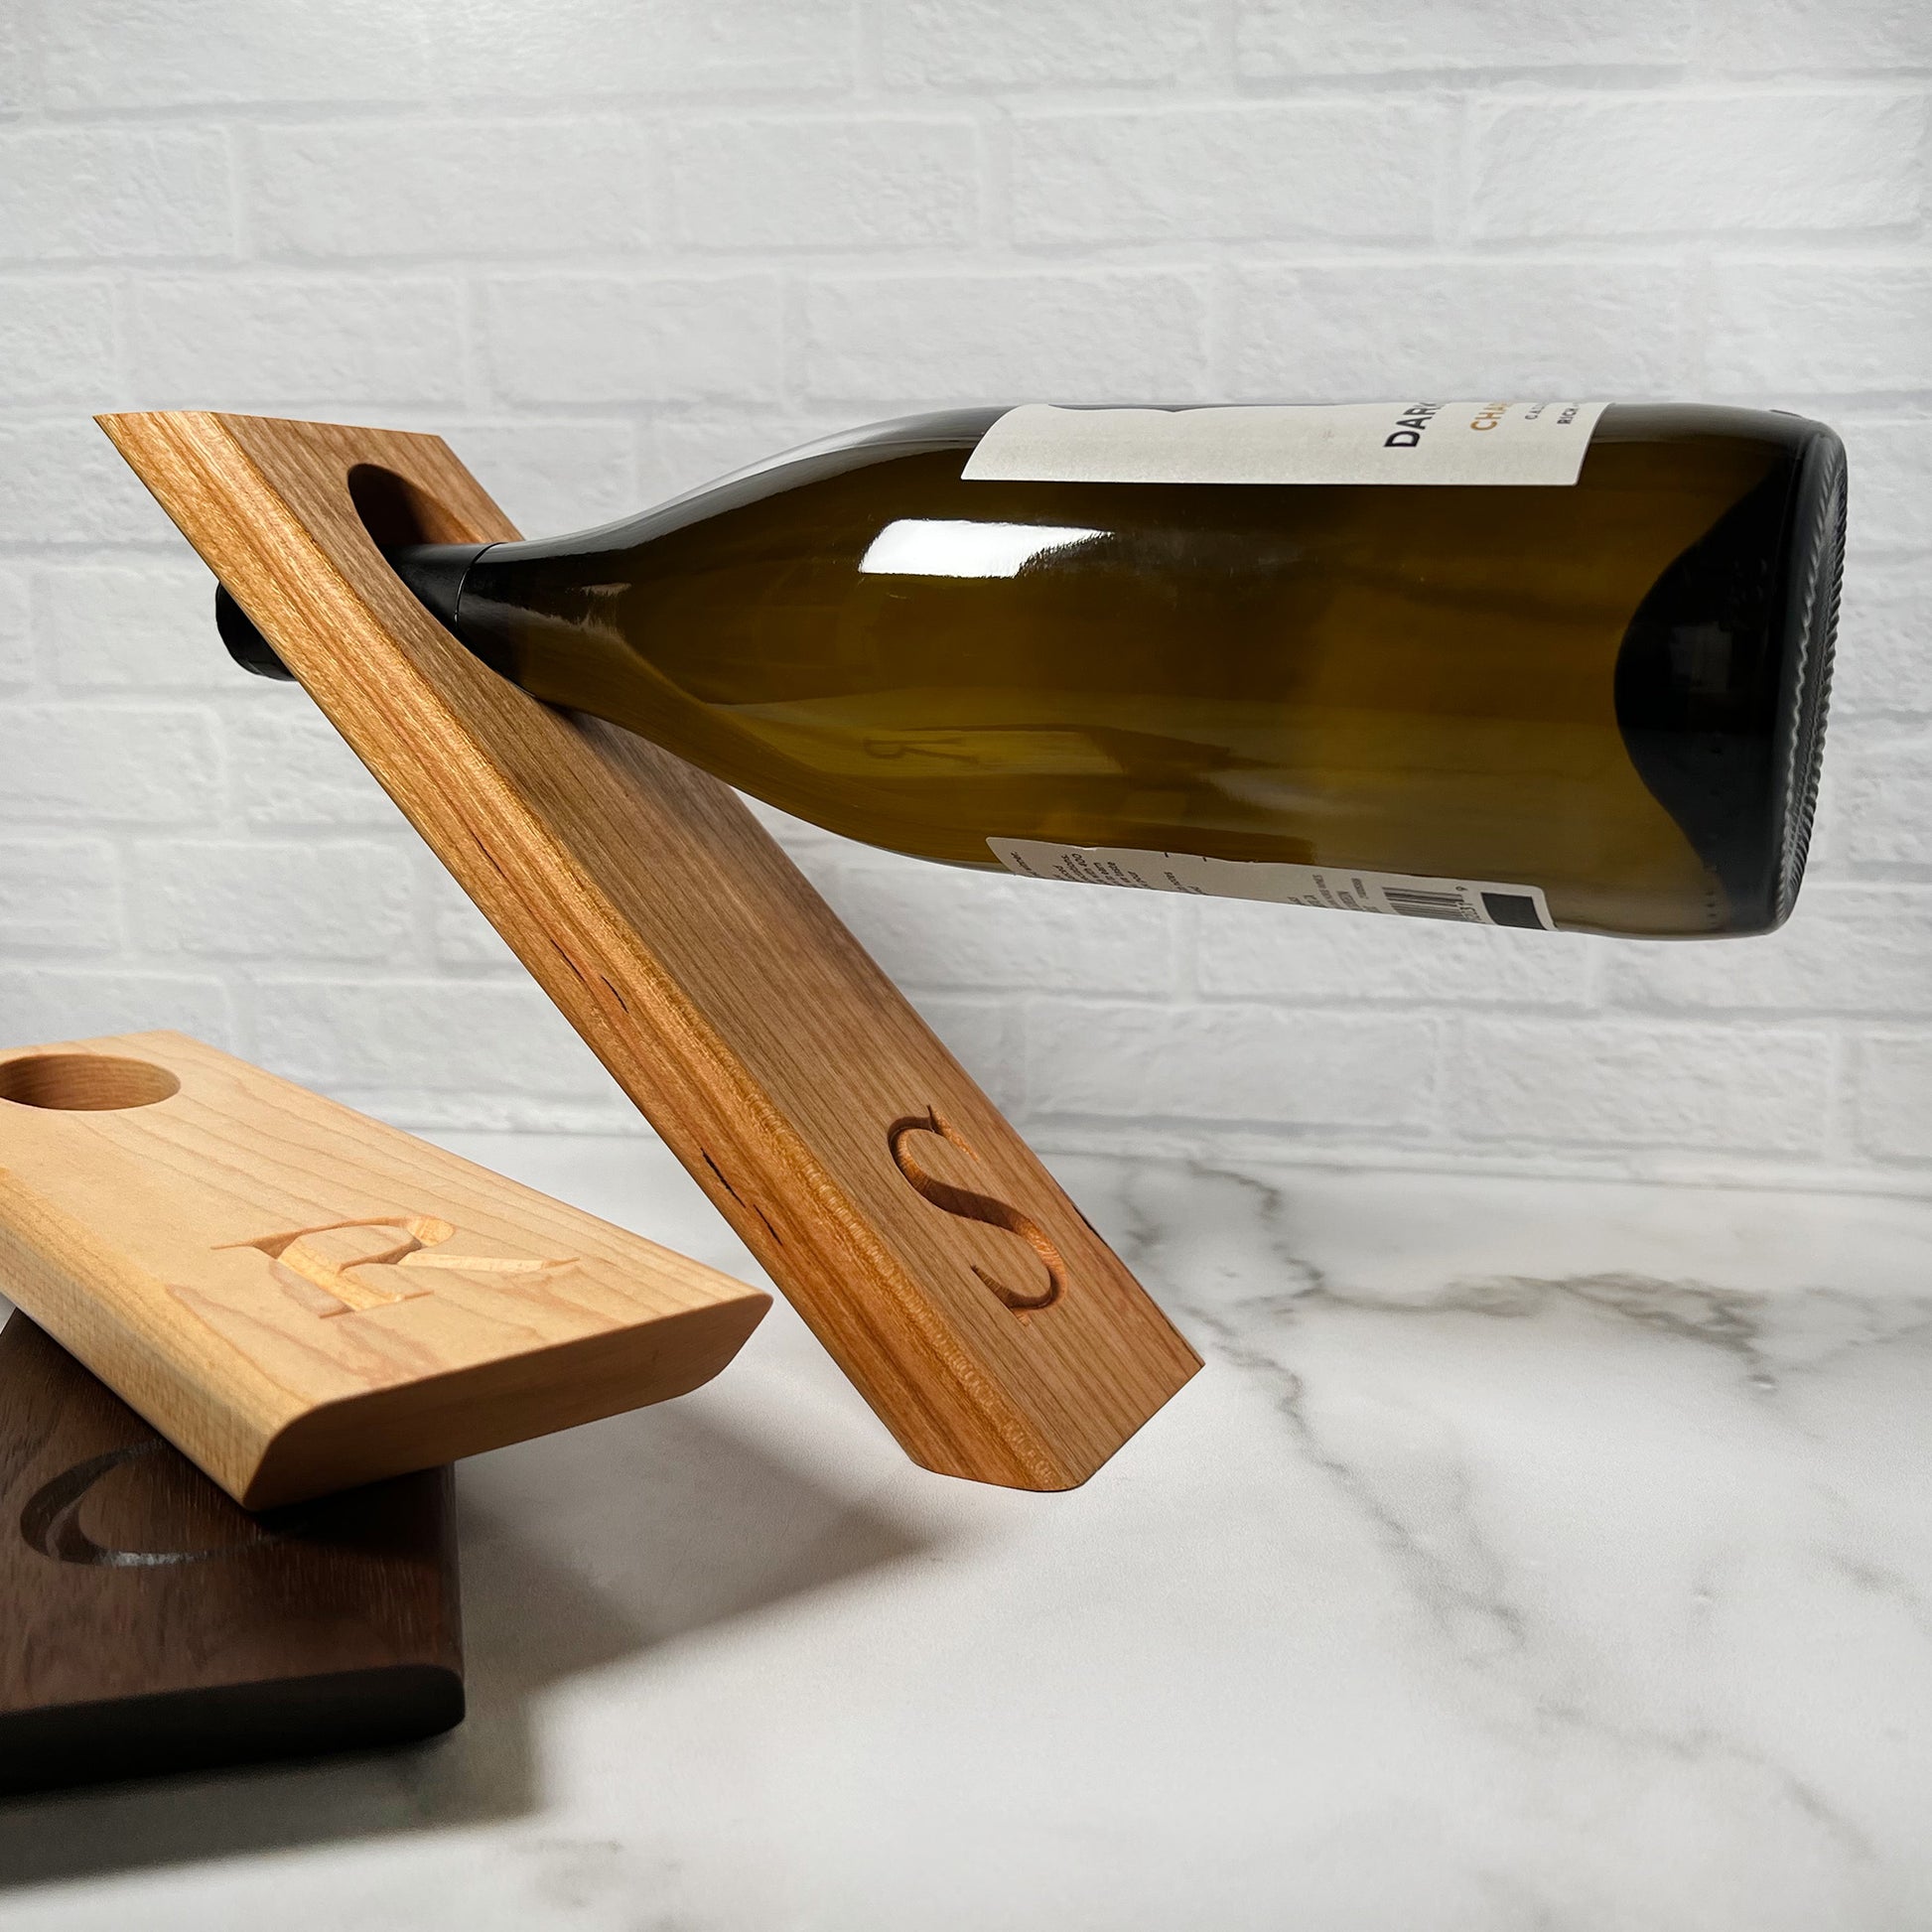 A Balancing wine bottle holder with a bottle of wine on it.